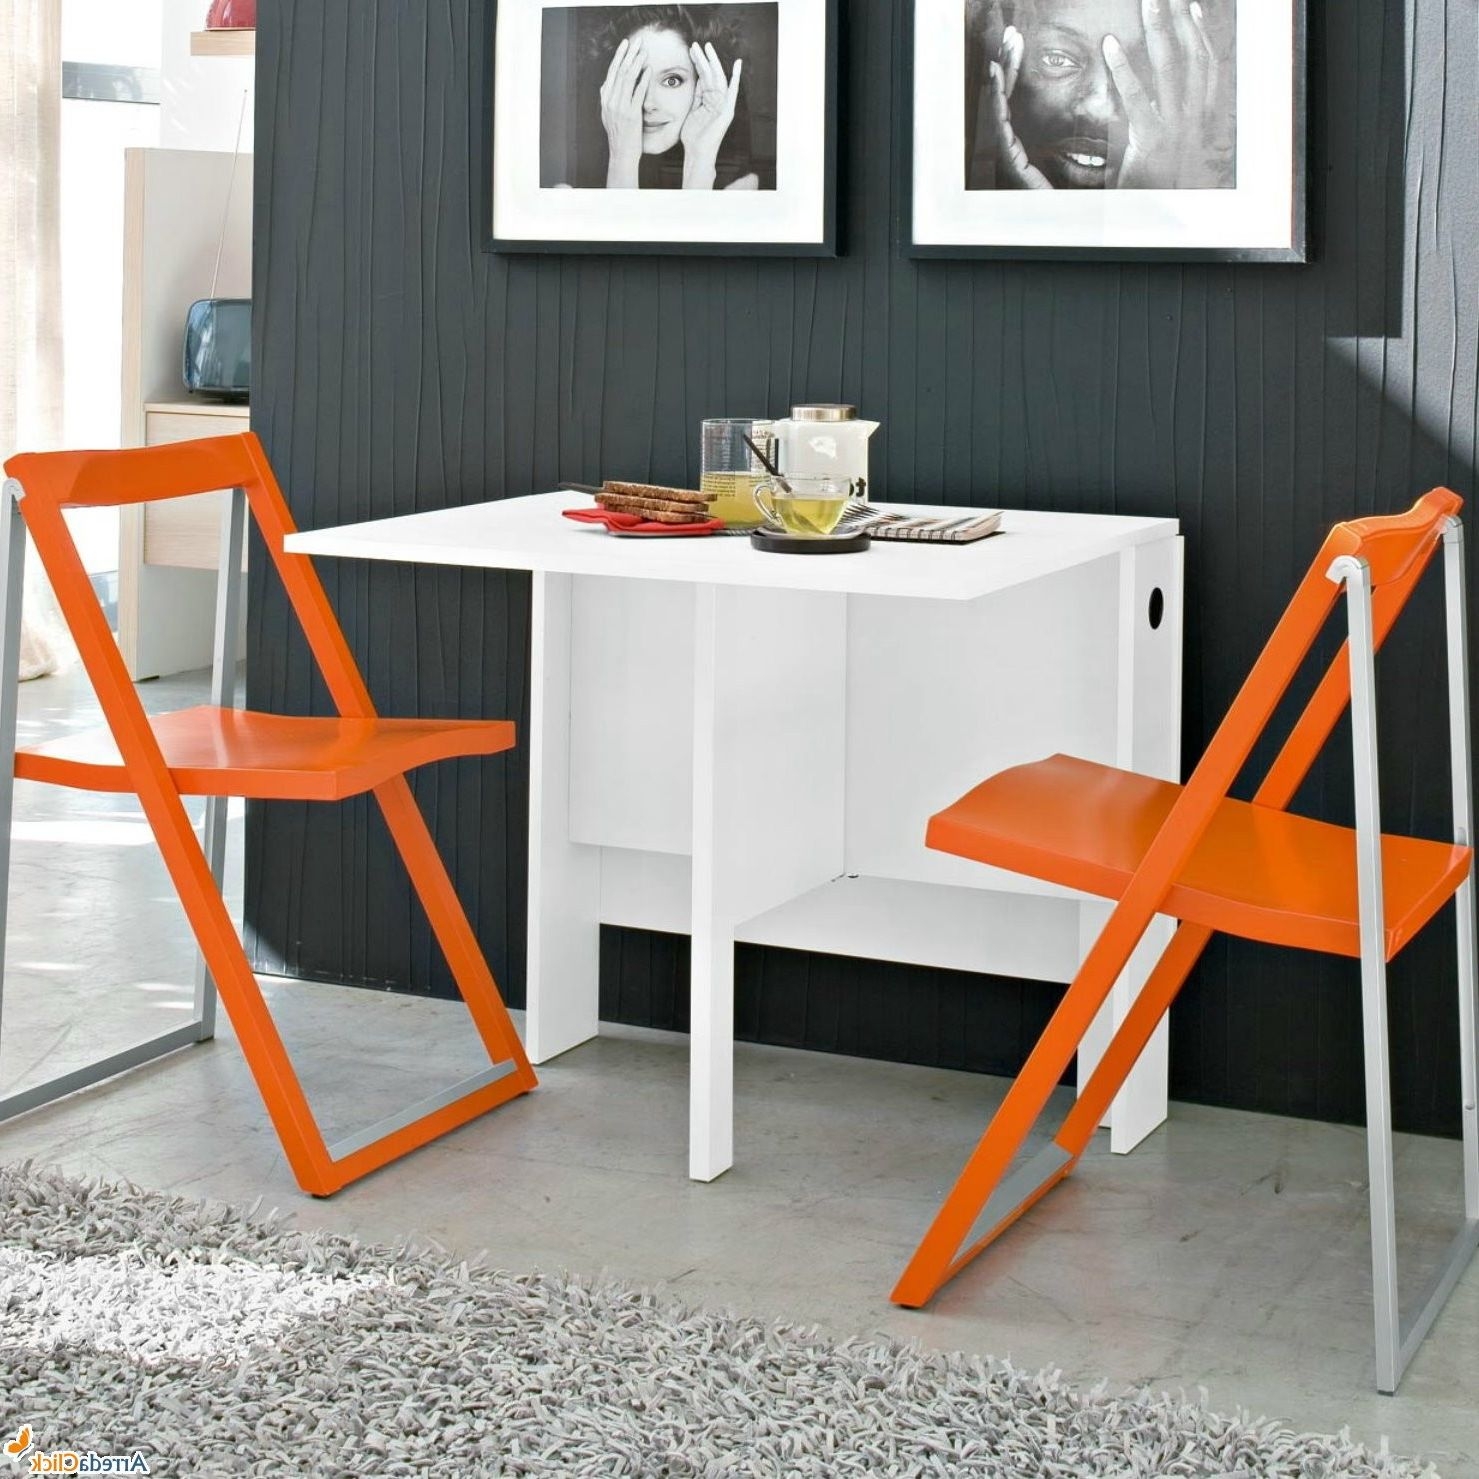 space saving table and chair white space saving table and orange folding chairs